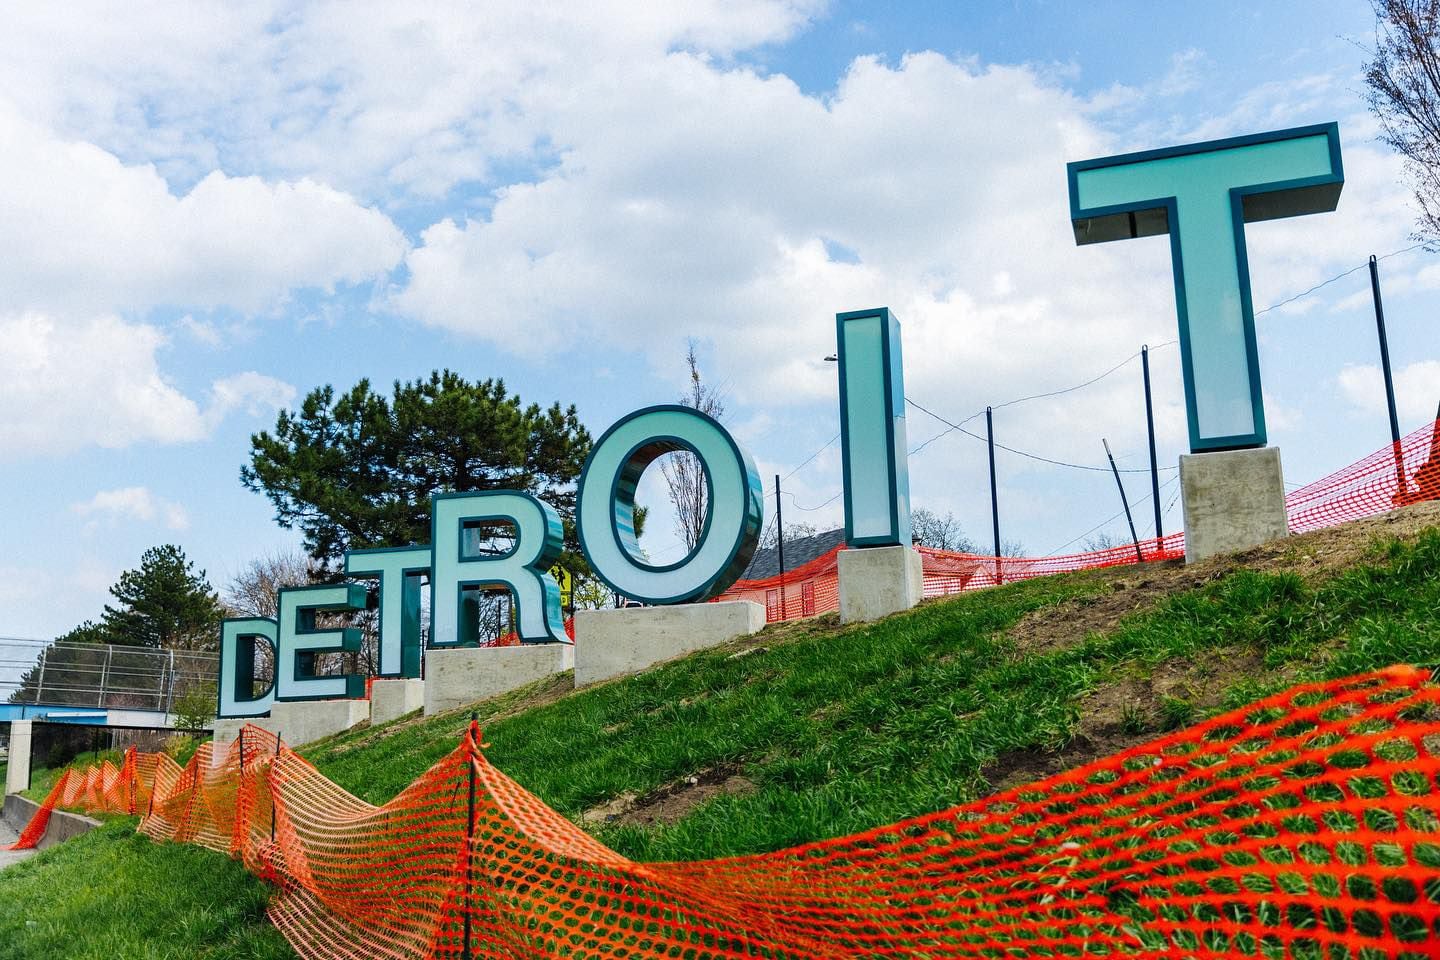 ‘Toys R Us, bruh’: Why many aren’t impressed with Detroit’s new ‘Hollywood’ sign